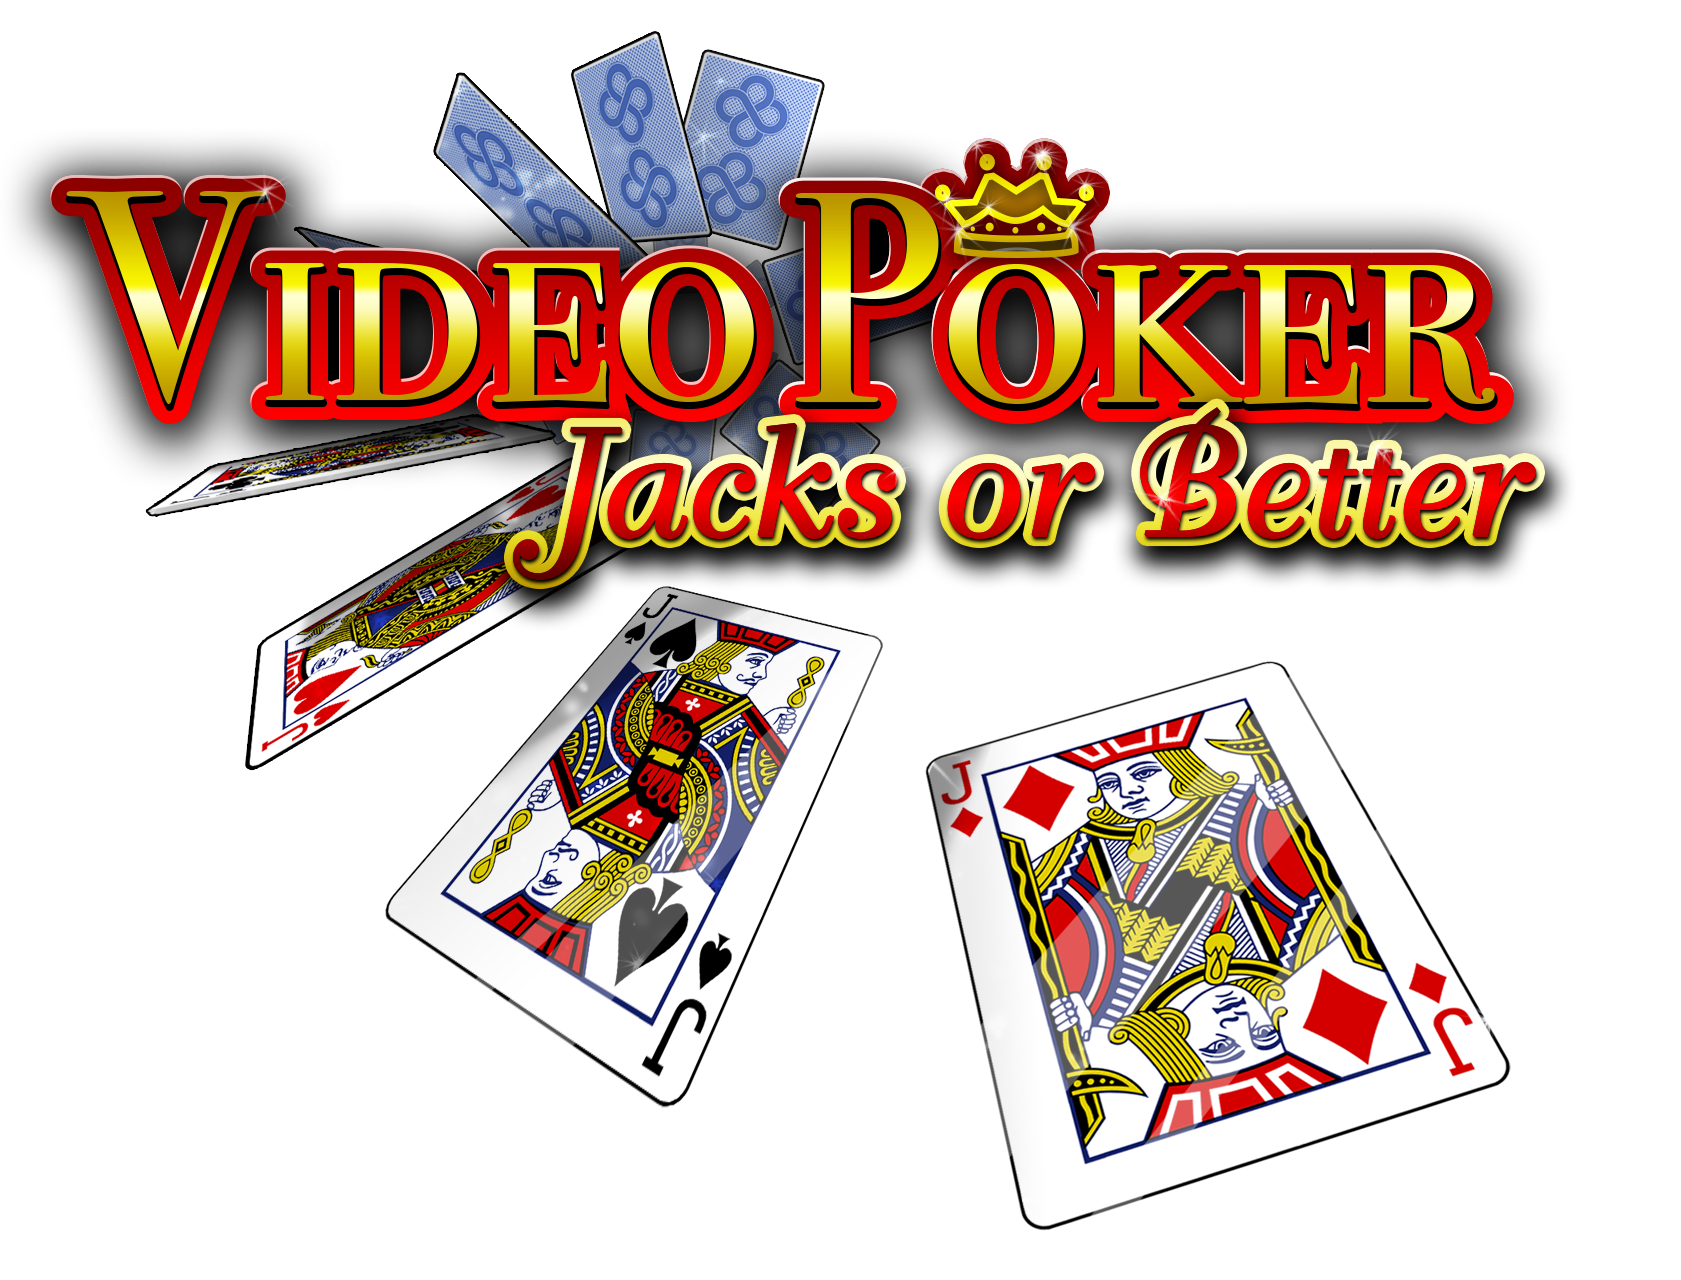 Www video poker com play games to play